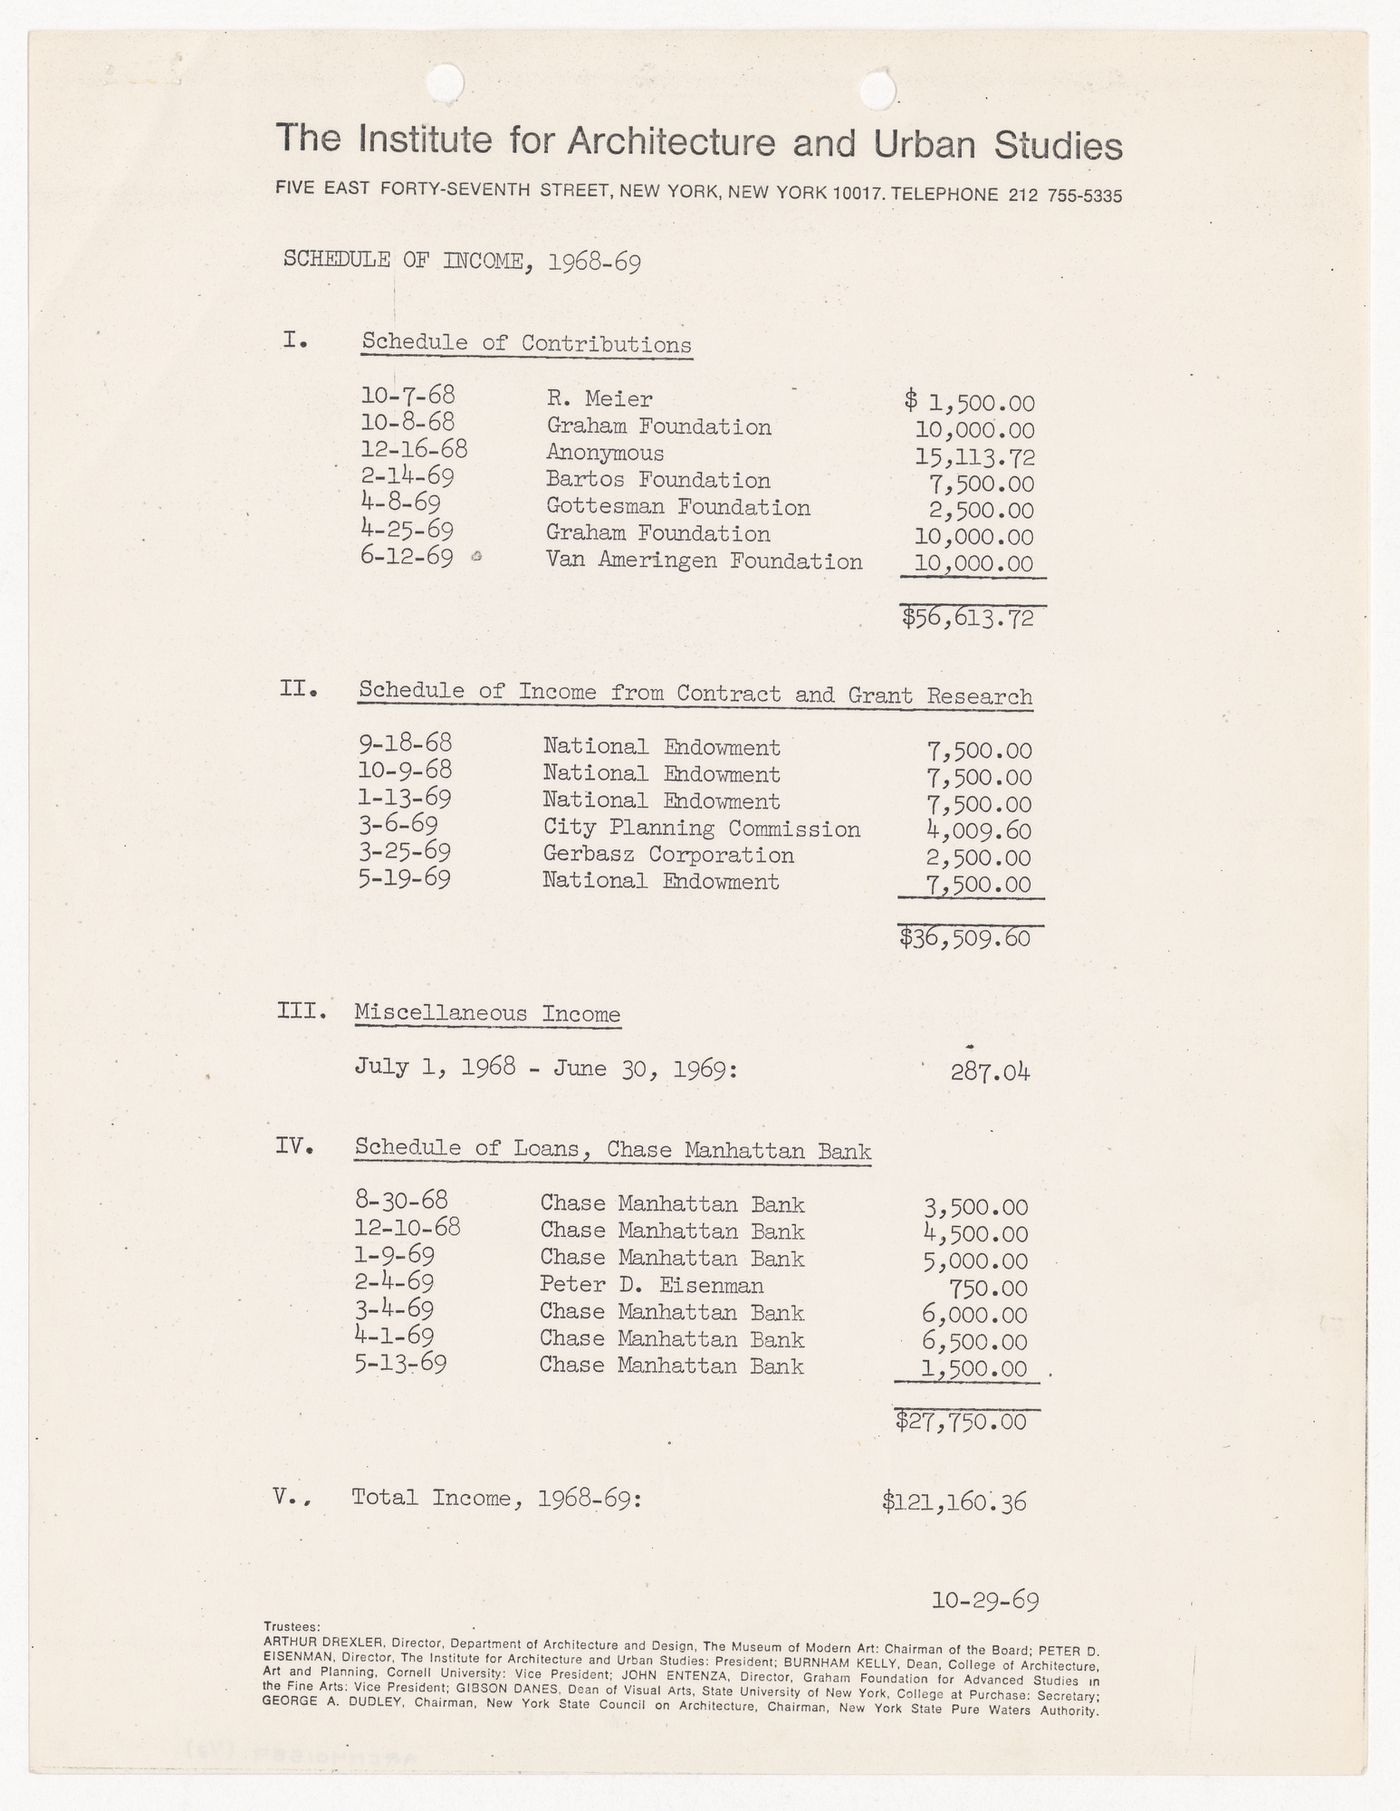 Schedule of income, expendidutes and reconciliation of income and expenditures for financial year 1968-1969